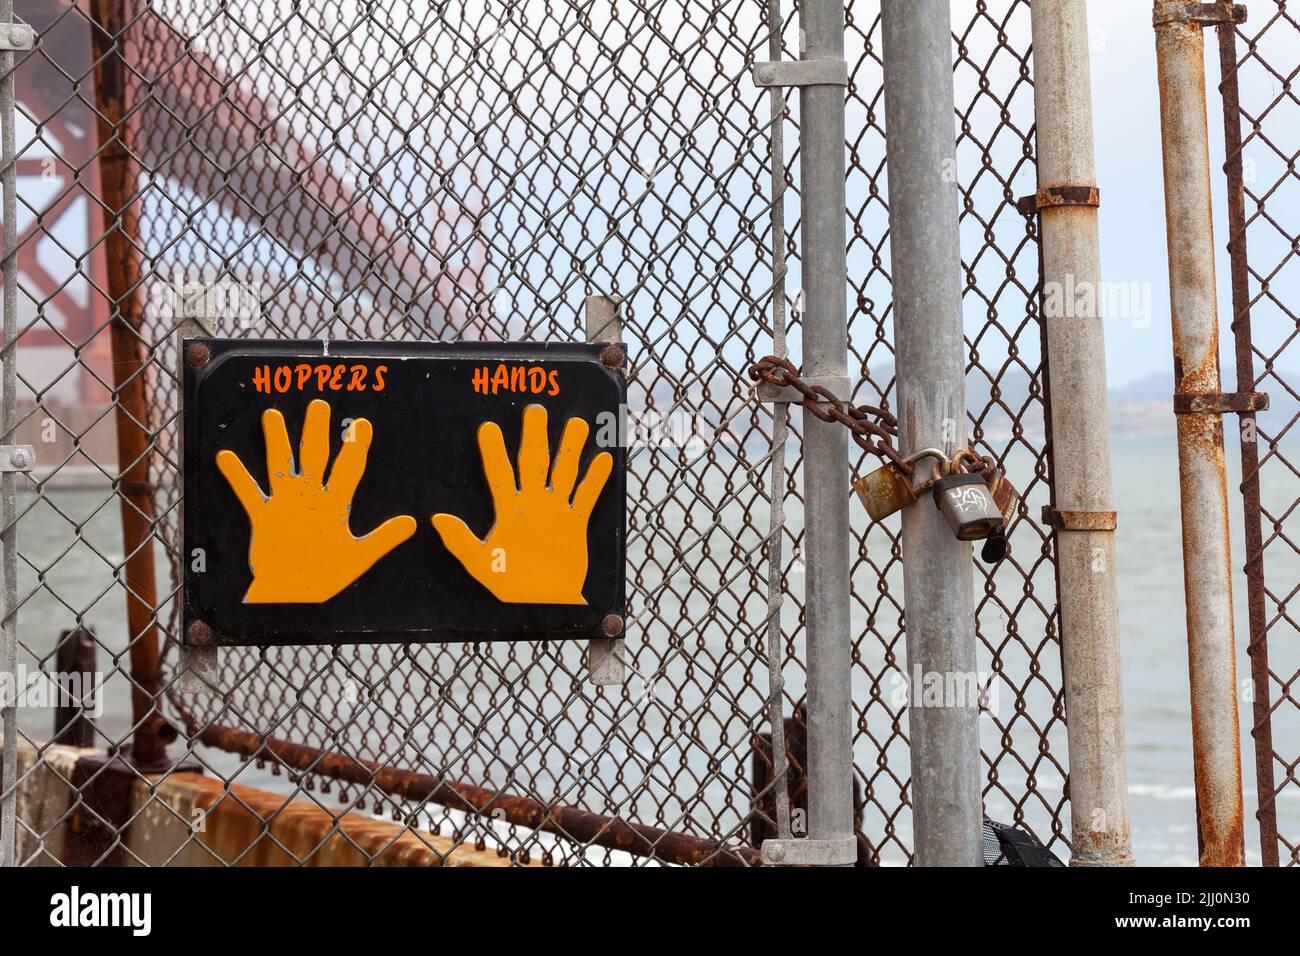 Hoppers Hands sign created by Ironworker and and volunteer suicide rescue worker Ken Hopper in 2000 hung by the chainlink fence at Fort Point Stock Photo